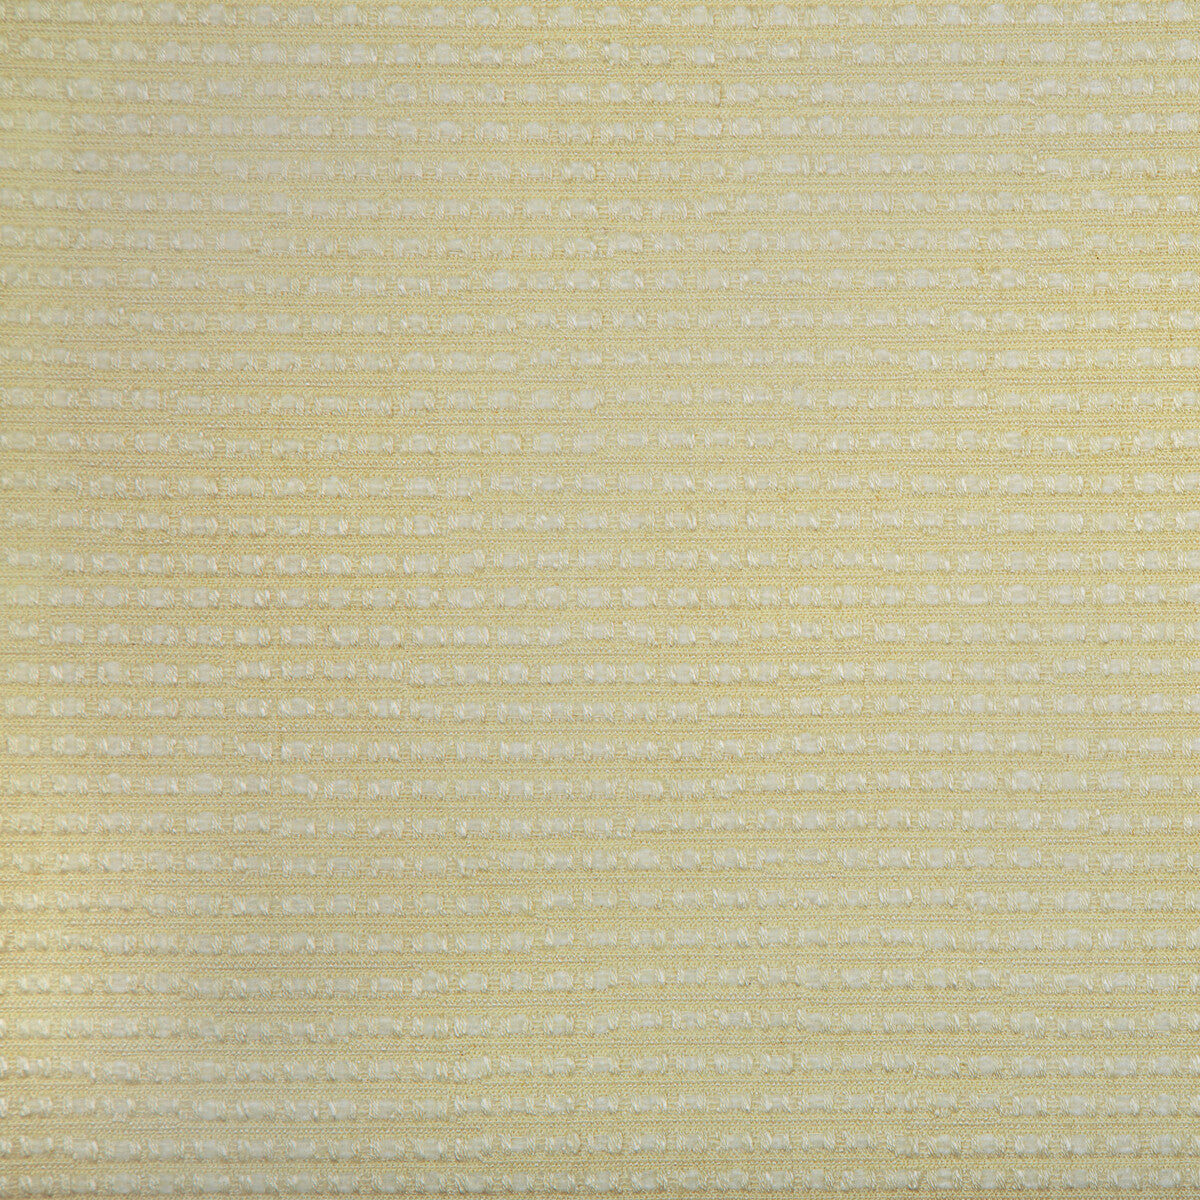 Stissing fabric in cream color - pattern 2019156.1.0 - by Lee Jofa in the Carrier And Company collection